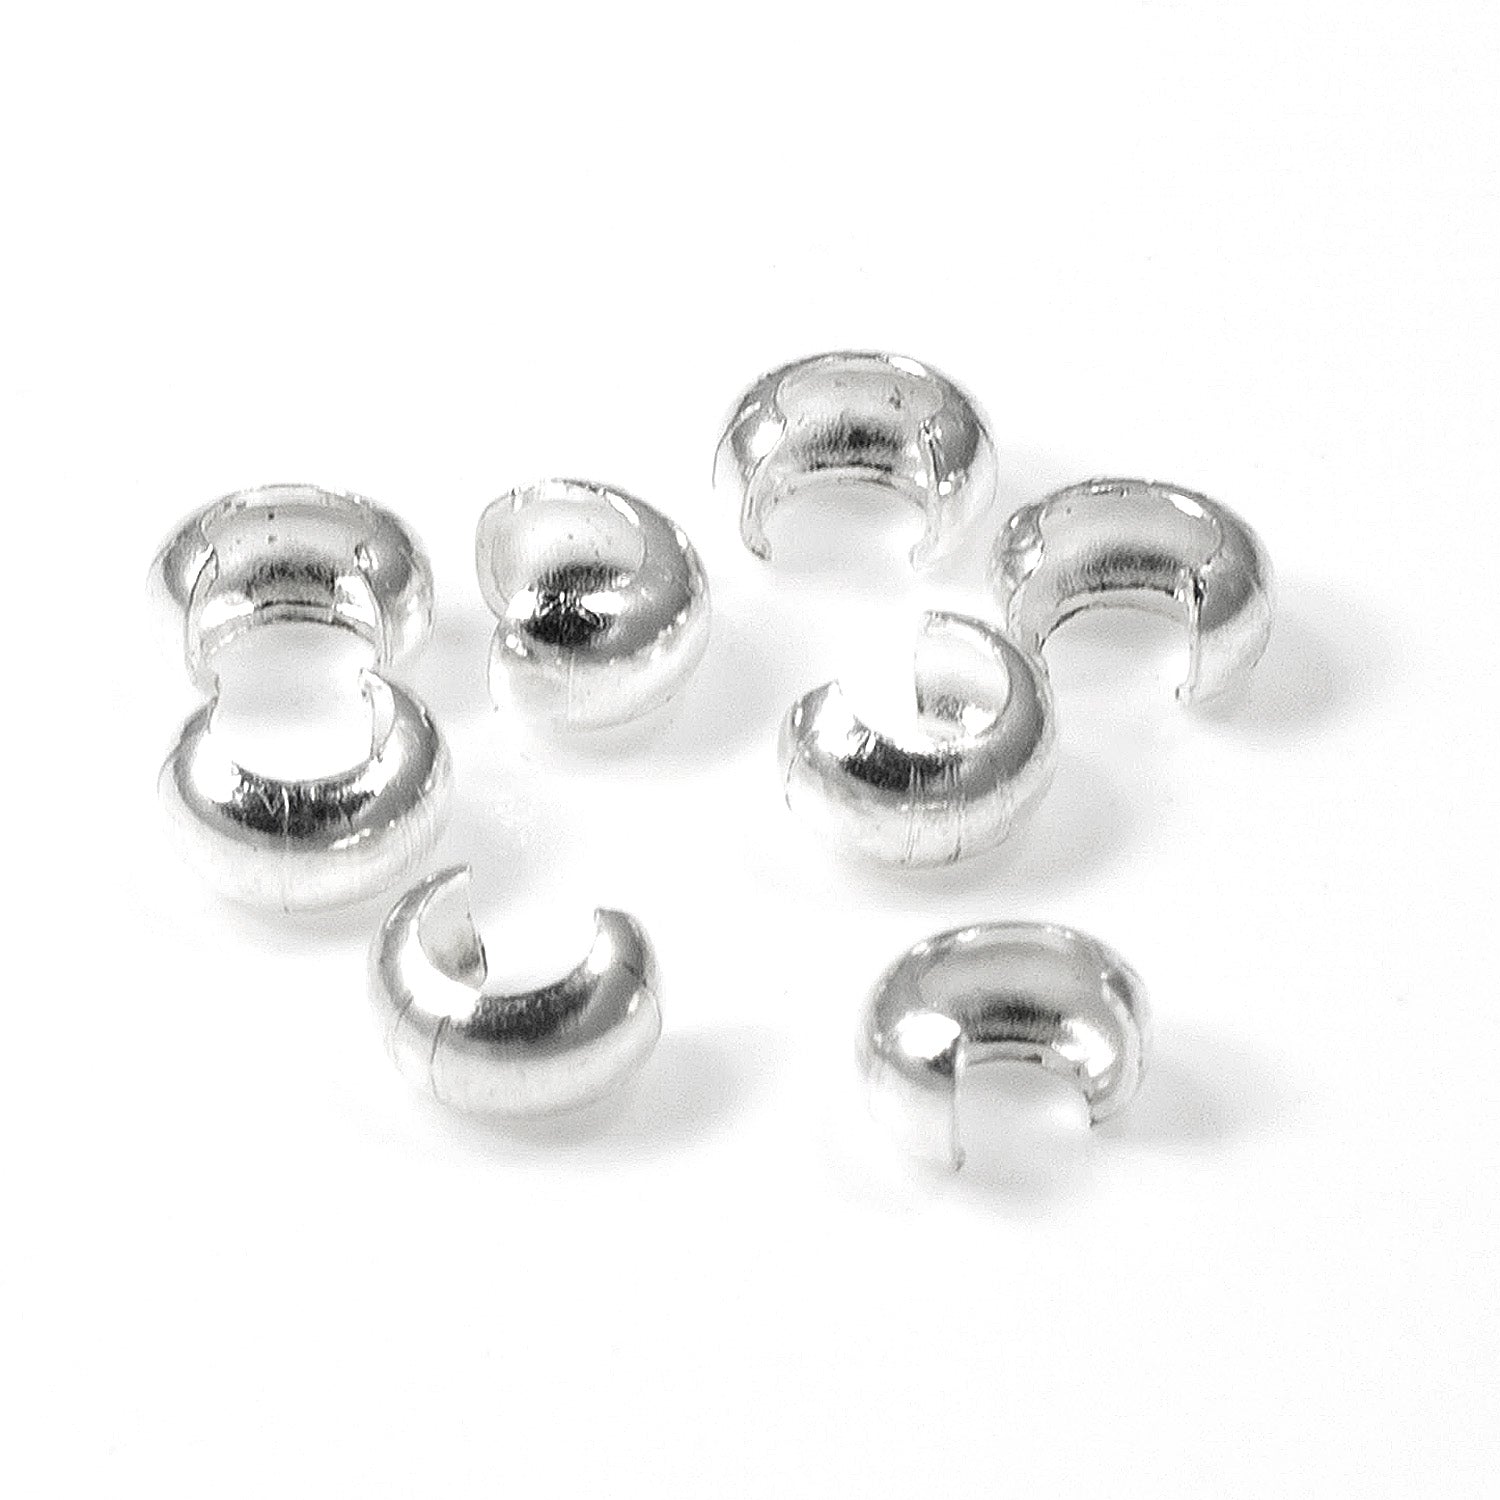 Silver Plated Crimp Bead Covers, TierraCast 3mm 50/PKG